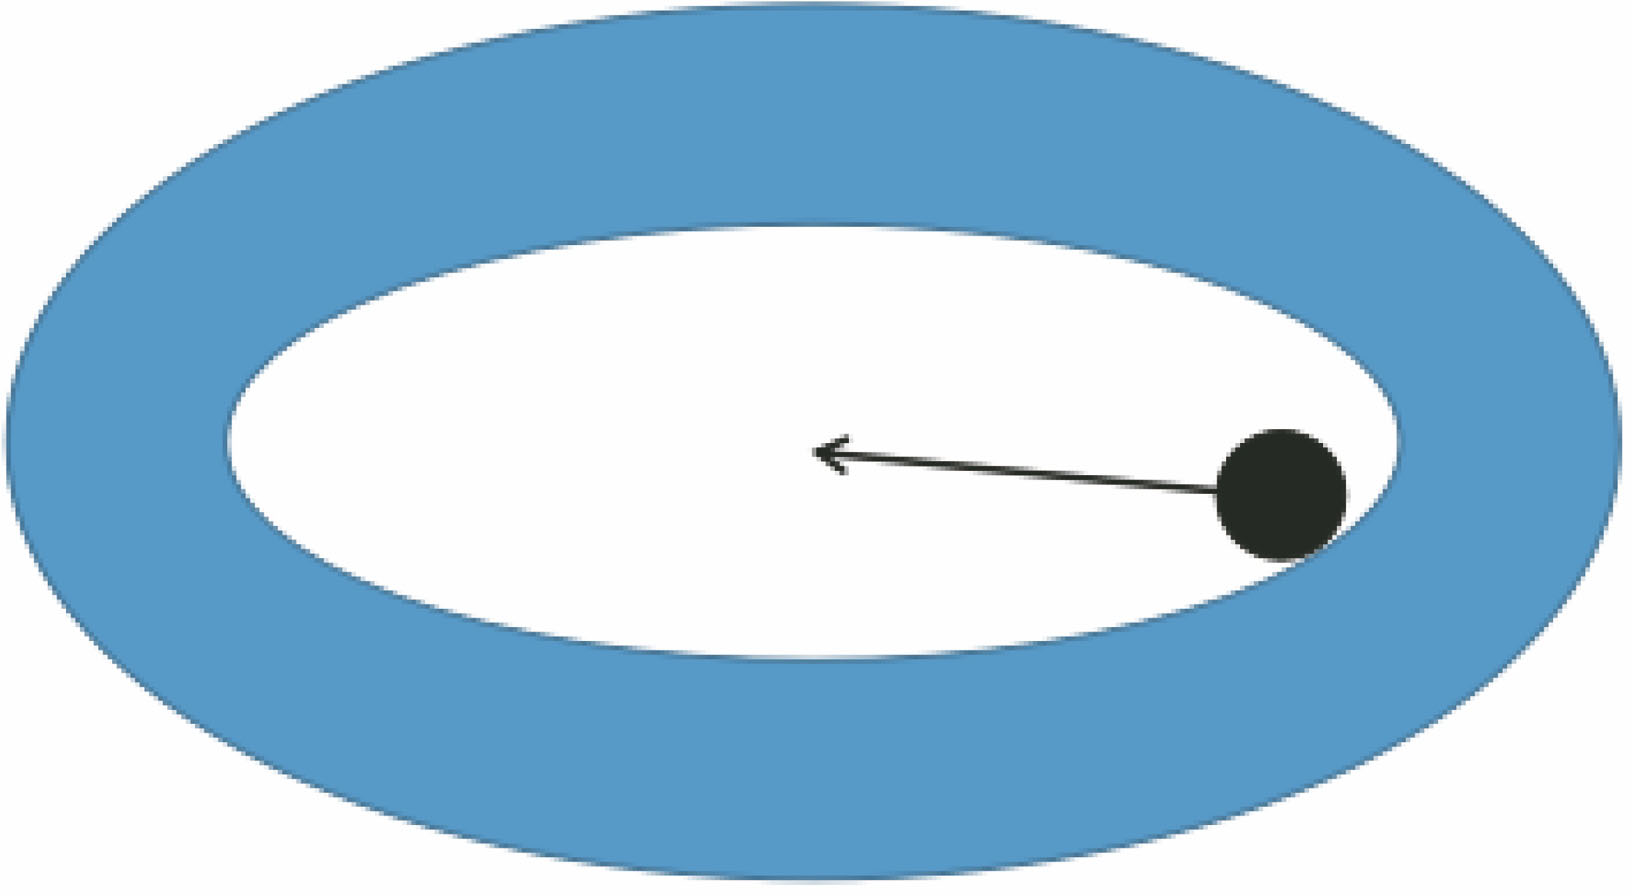 Schematic of elliptical vector hollow beam for manipulating Rayleigh particle